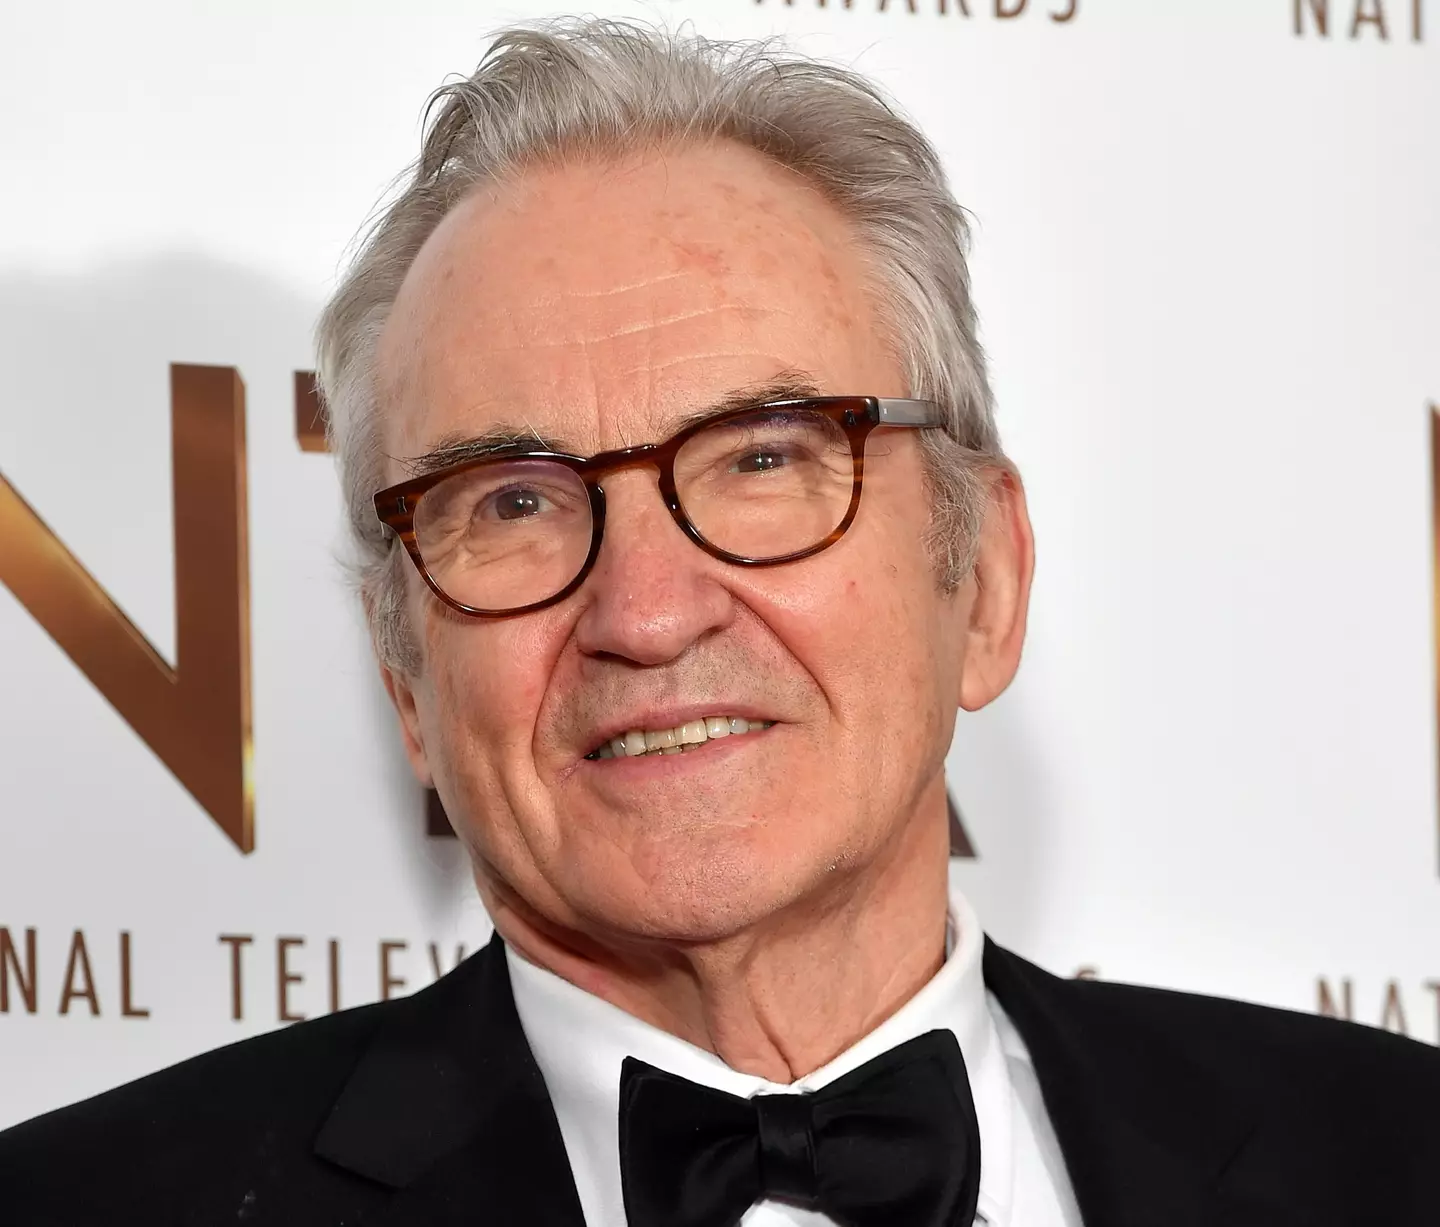 Larry Lamb is one of several Gavin and Stacey stars who've said they'd like to do another special.